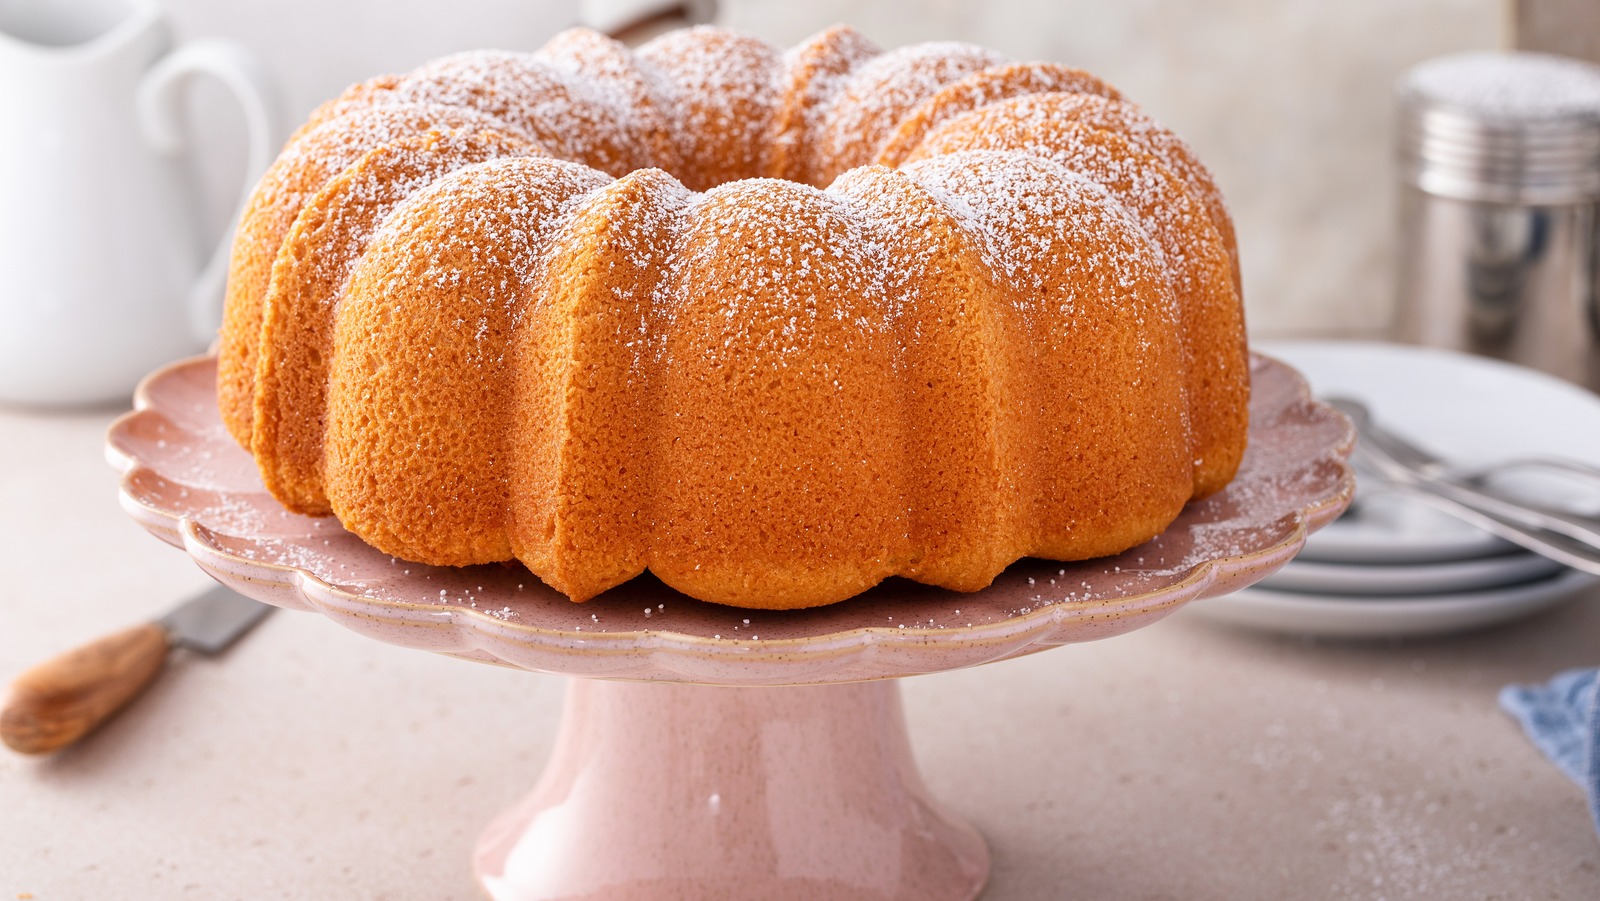 https://www.thedailymeal.com/img/gallery/11-tips-to-help-bake-your-best-bundt-cake-yet/l-intro-1670014283.jpg